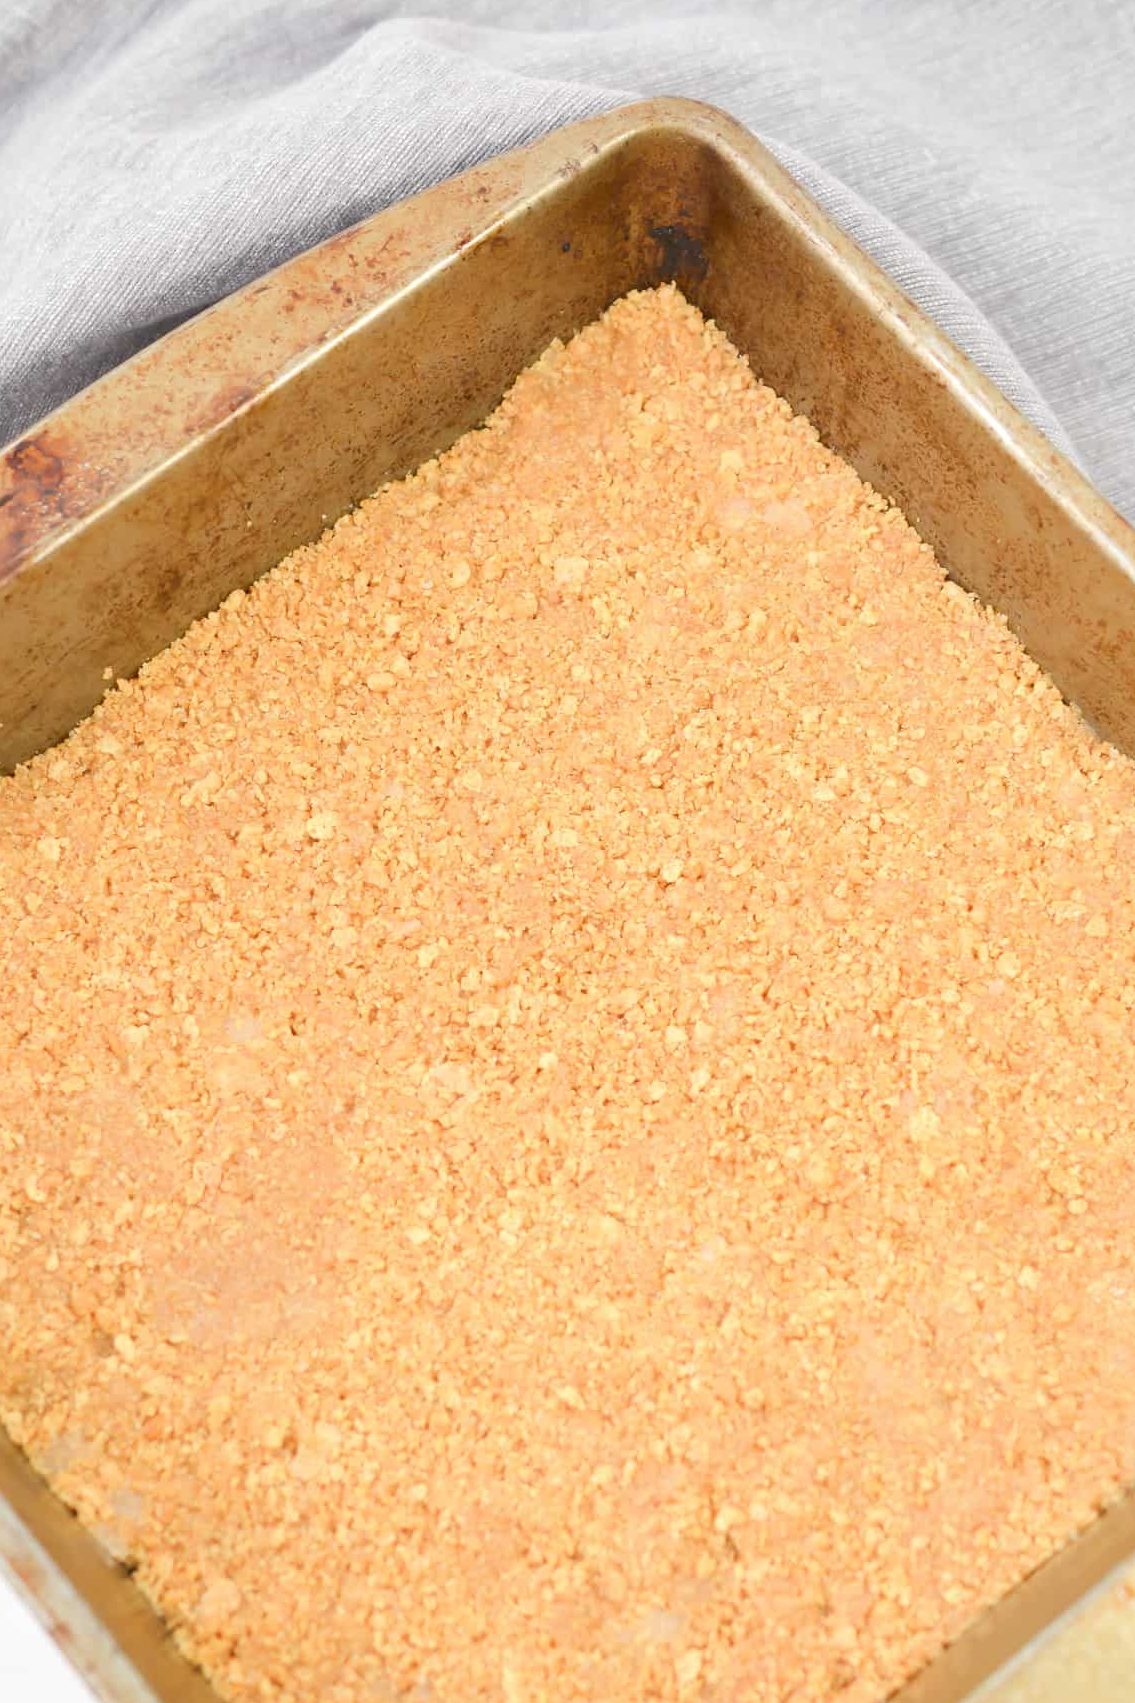 Press the crust mixture into the bottom of a well-greased 9x9 baking dish.